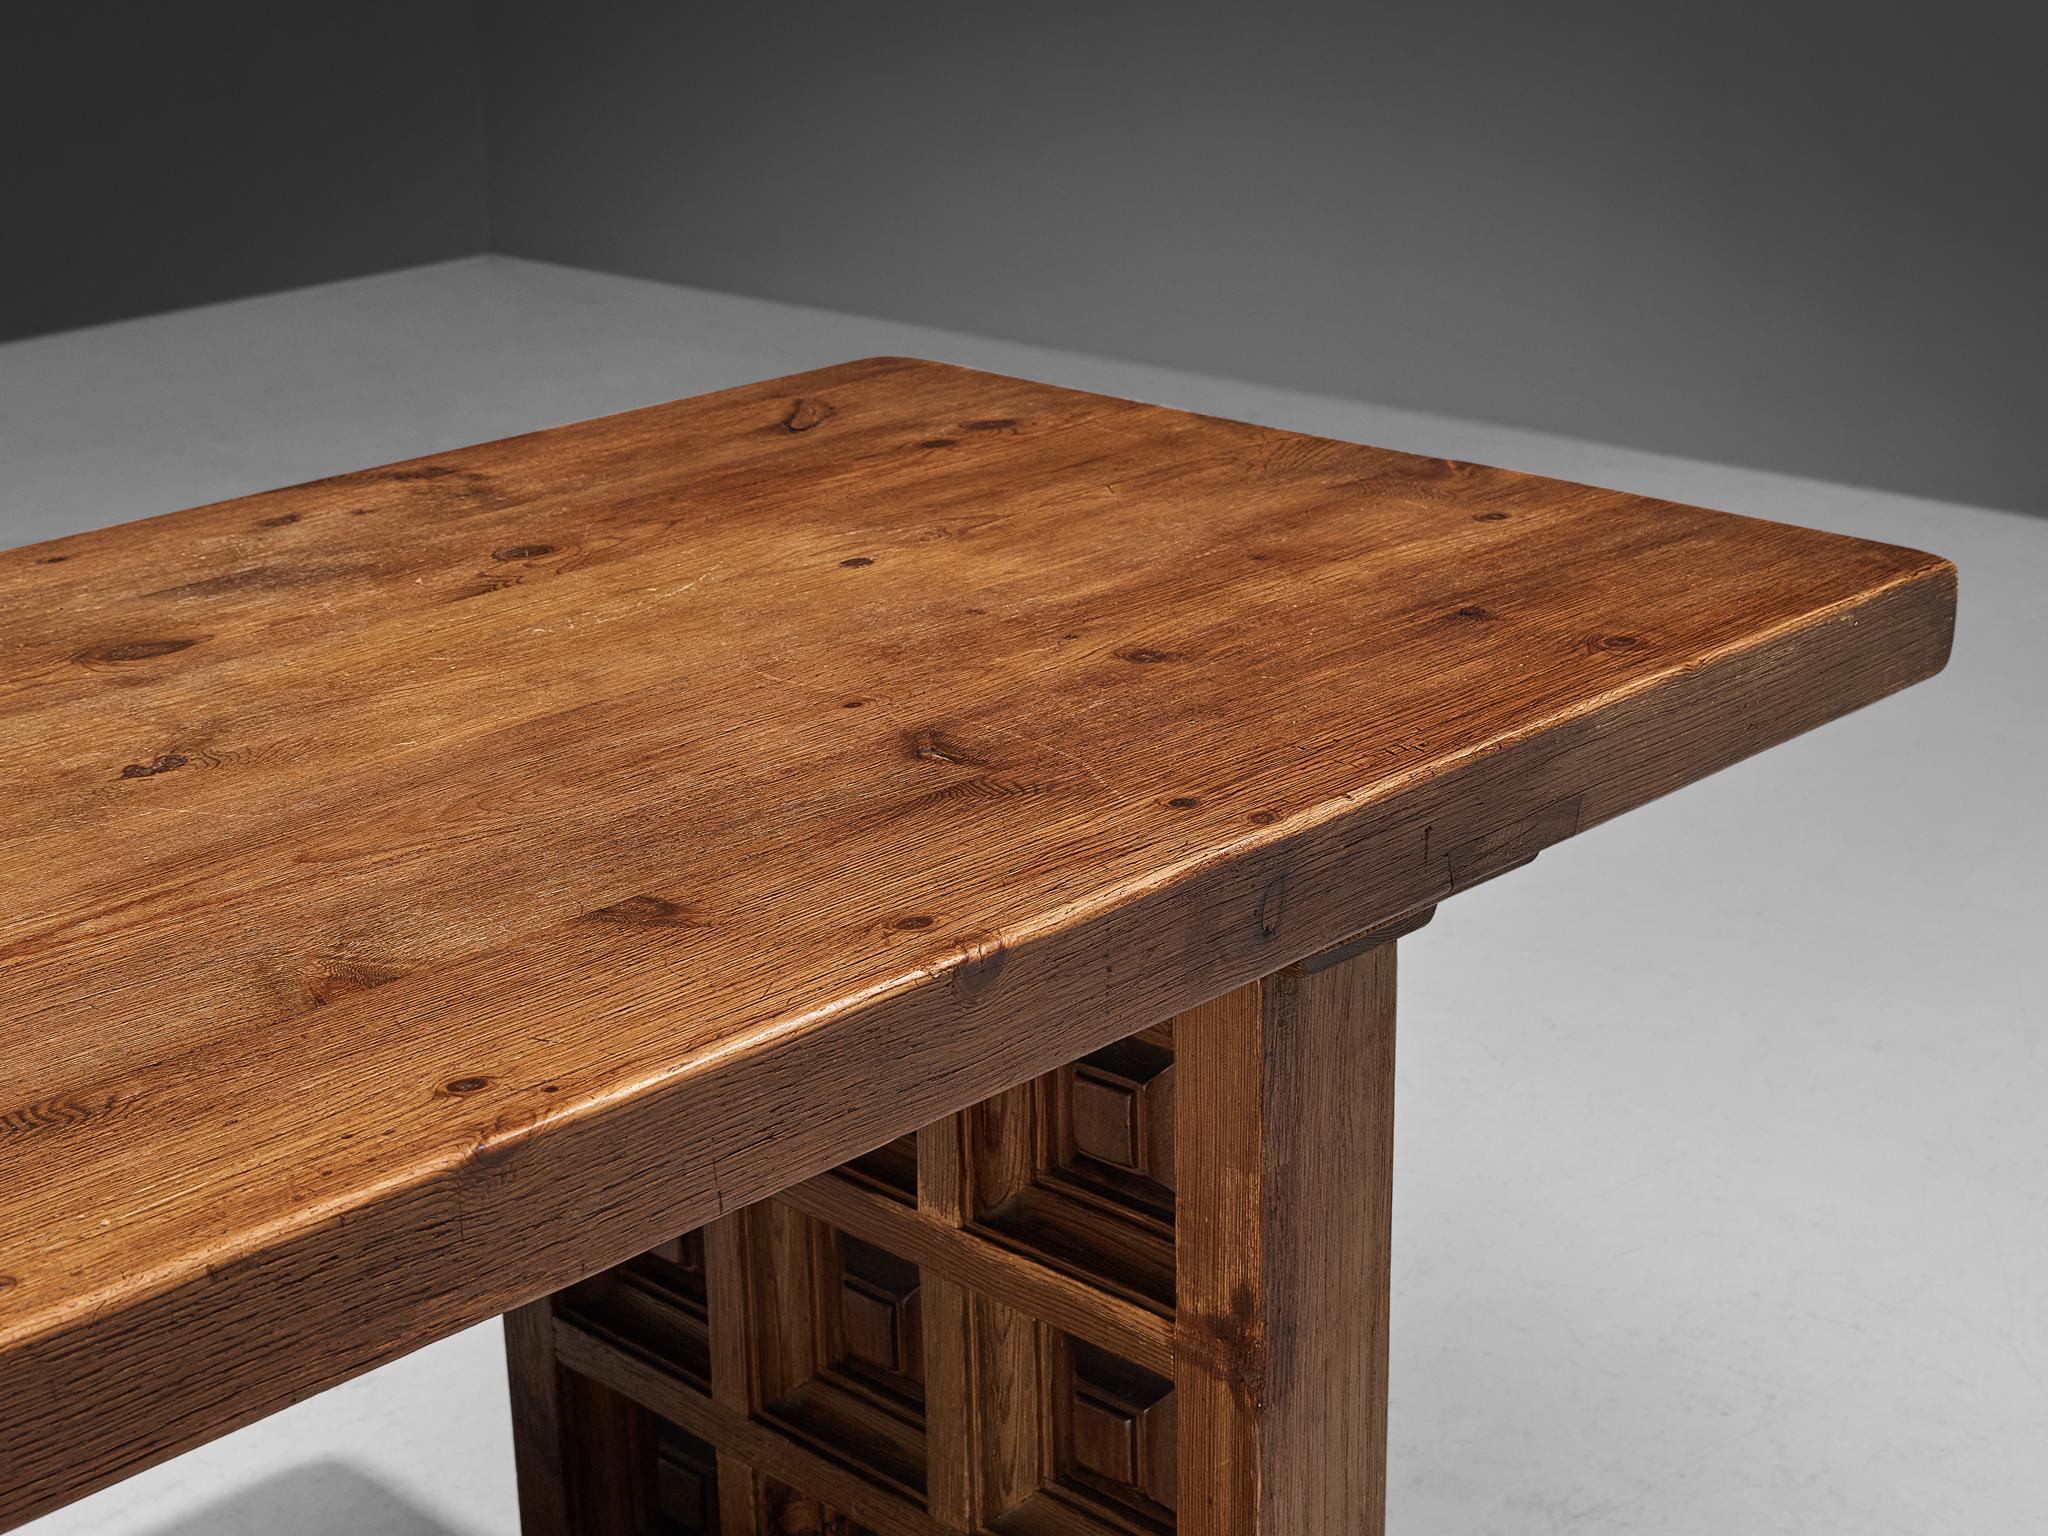 Spanish Biosca Dining Table in Stained Pine 